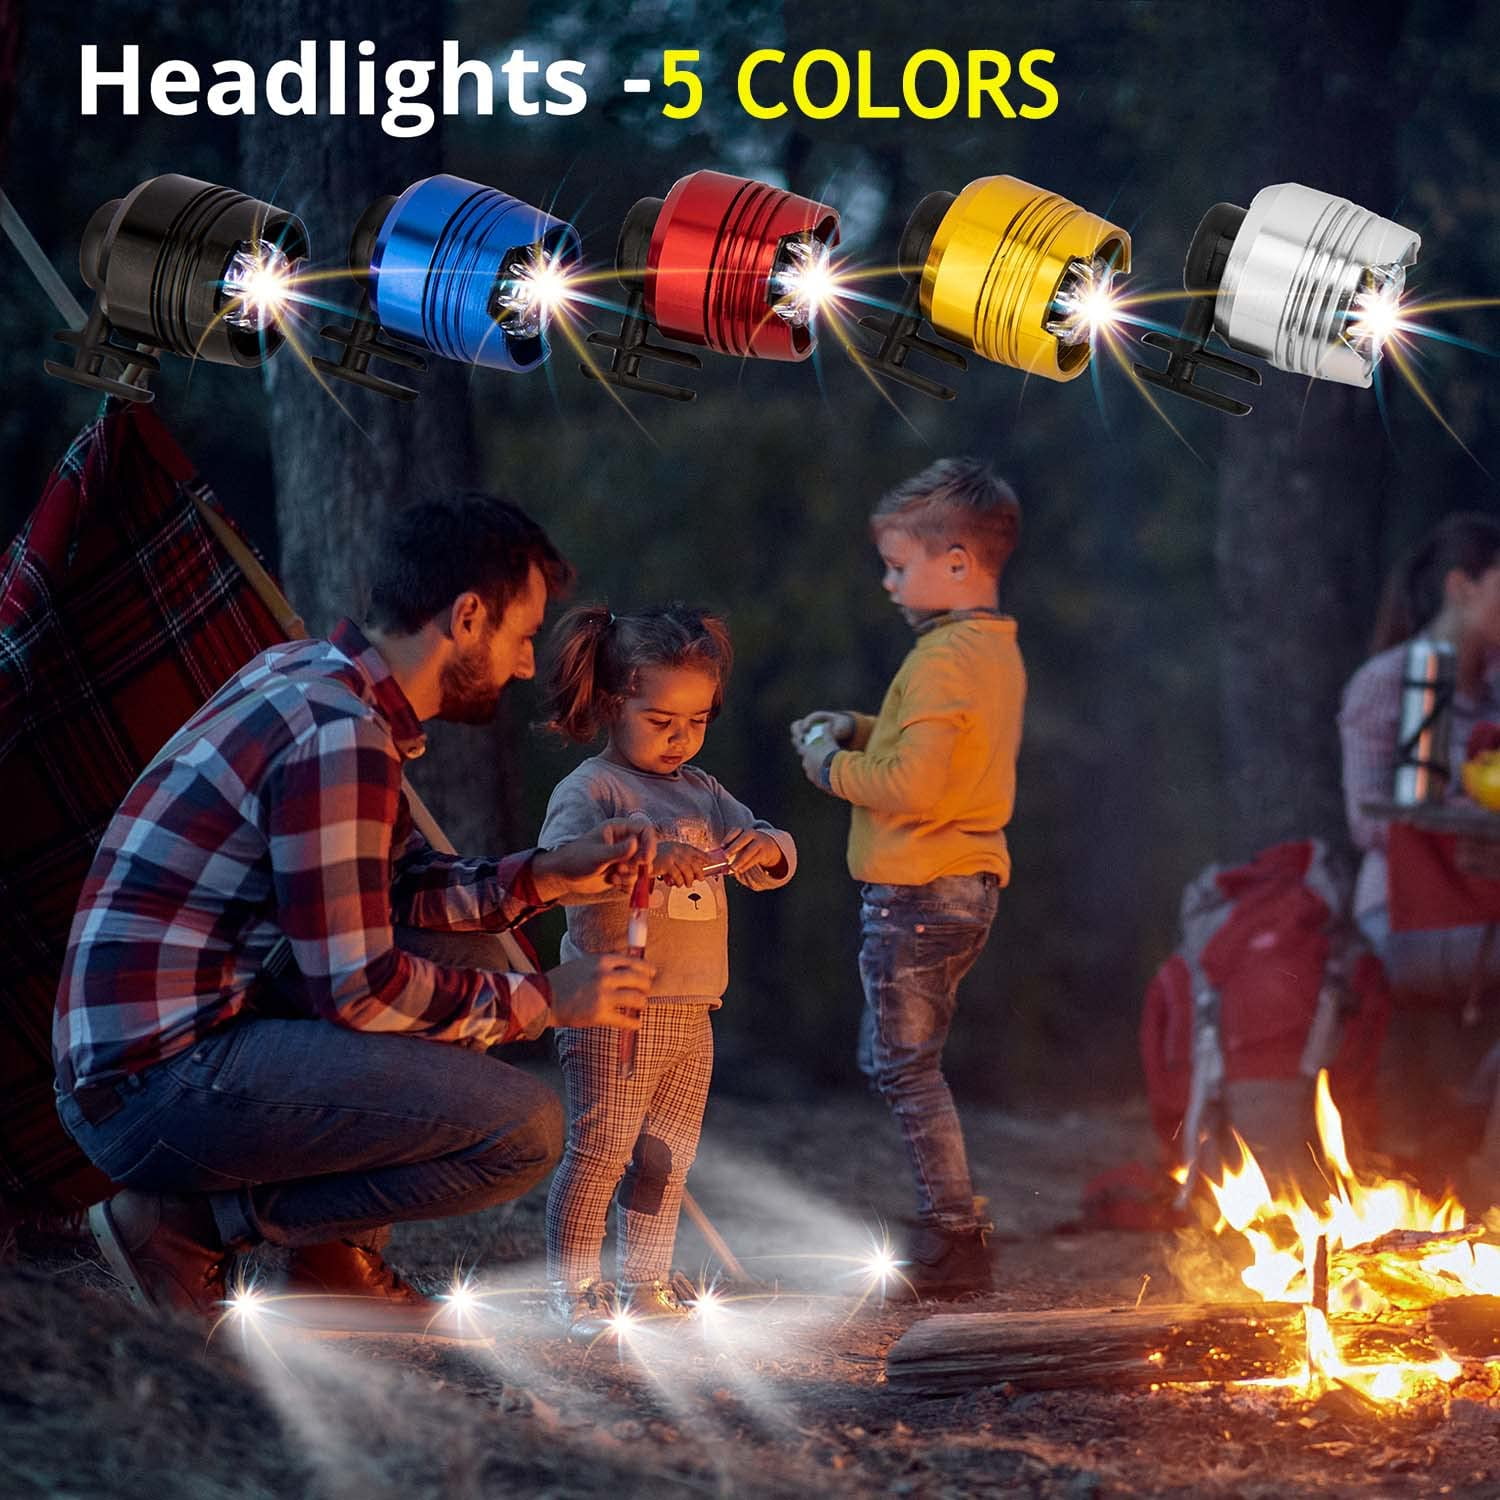 Dropship Headlights For Croc; 2Pcs Croc Lights For Shoes; Light Up Croc  Charms For Dog Walking; Handy Camping; Waterproof; 3 Modes Croc Lights to  Sell Online at a Lower Price